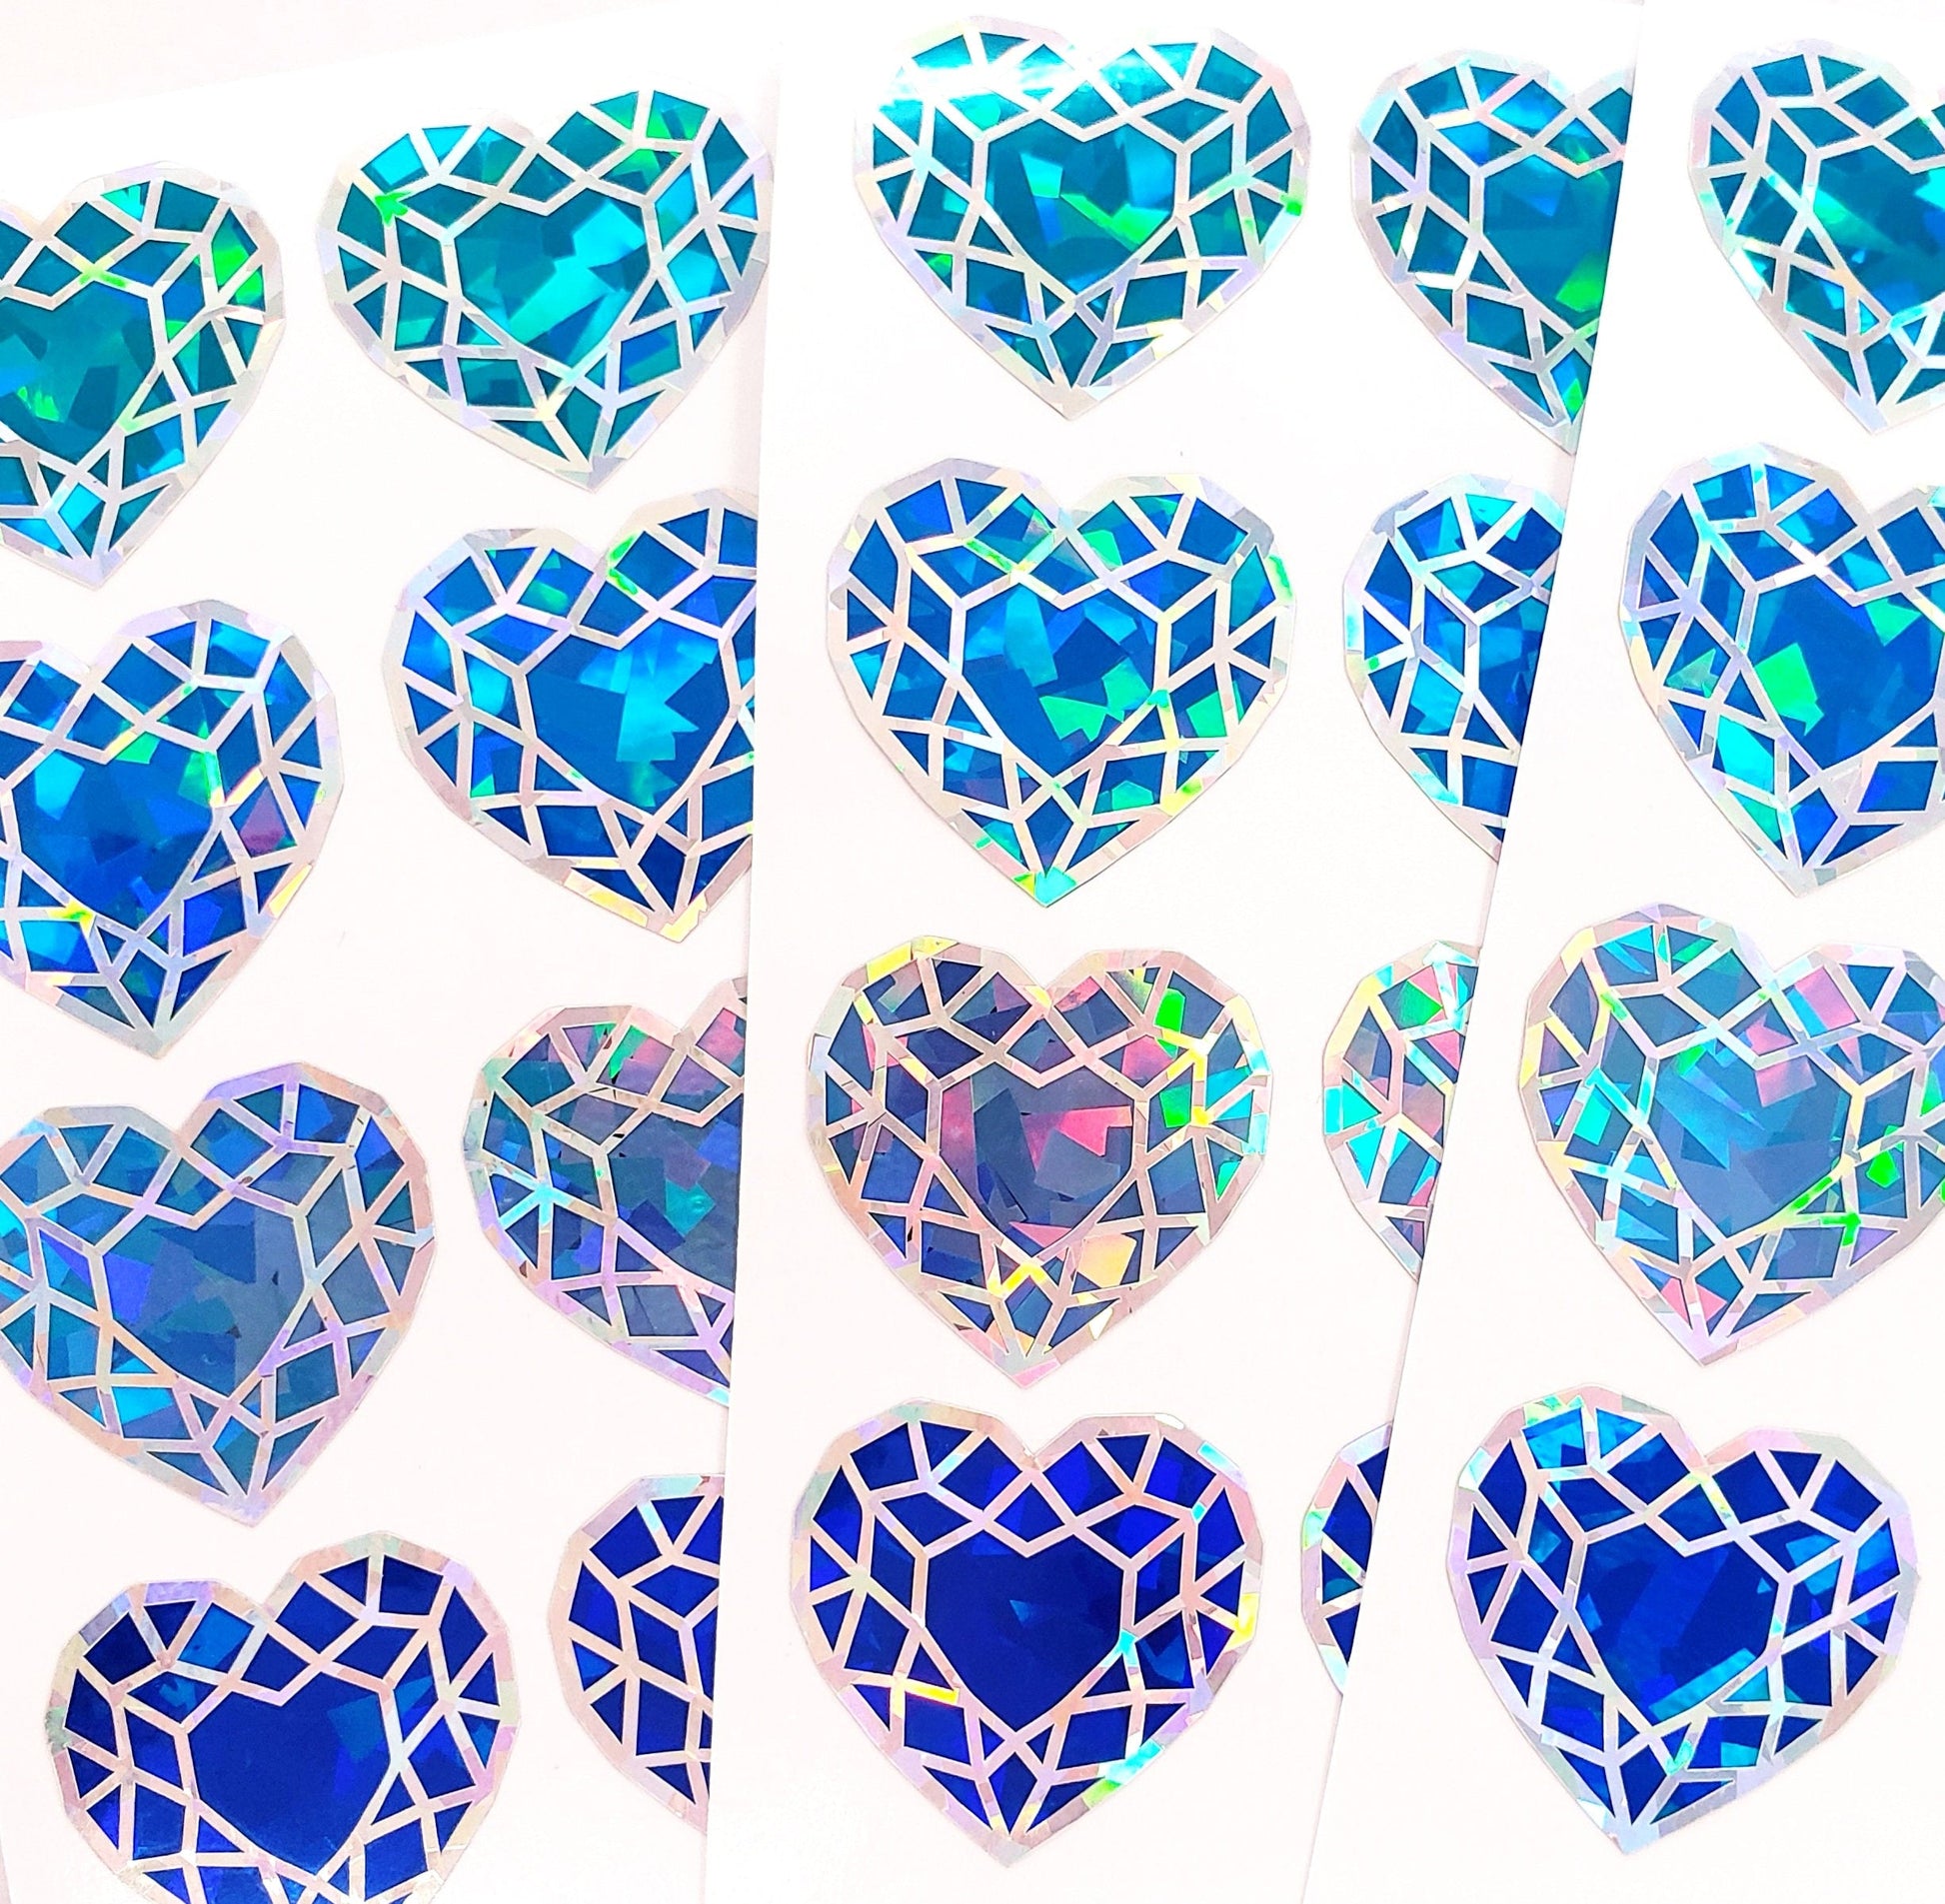 Light Blue Heart Diamond Stickers, set of 5 sparkling gems, vinyl decals for journals, tumblers, cards, March birthstone gift.